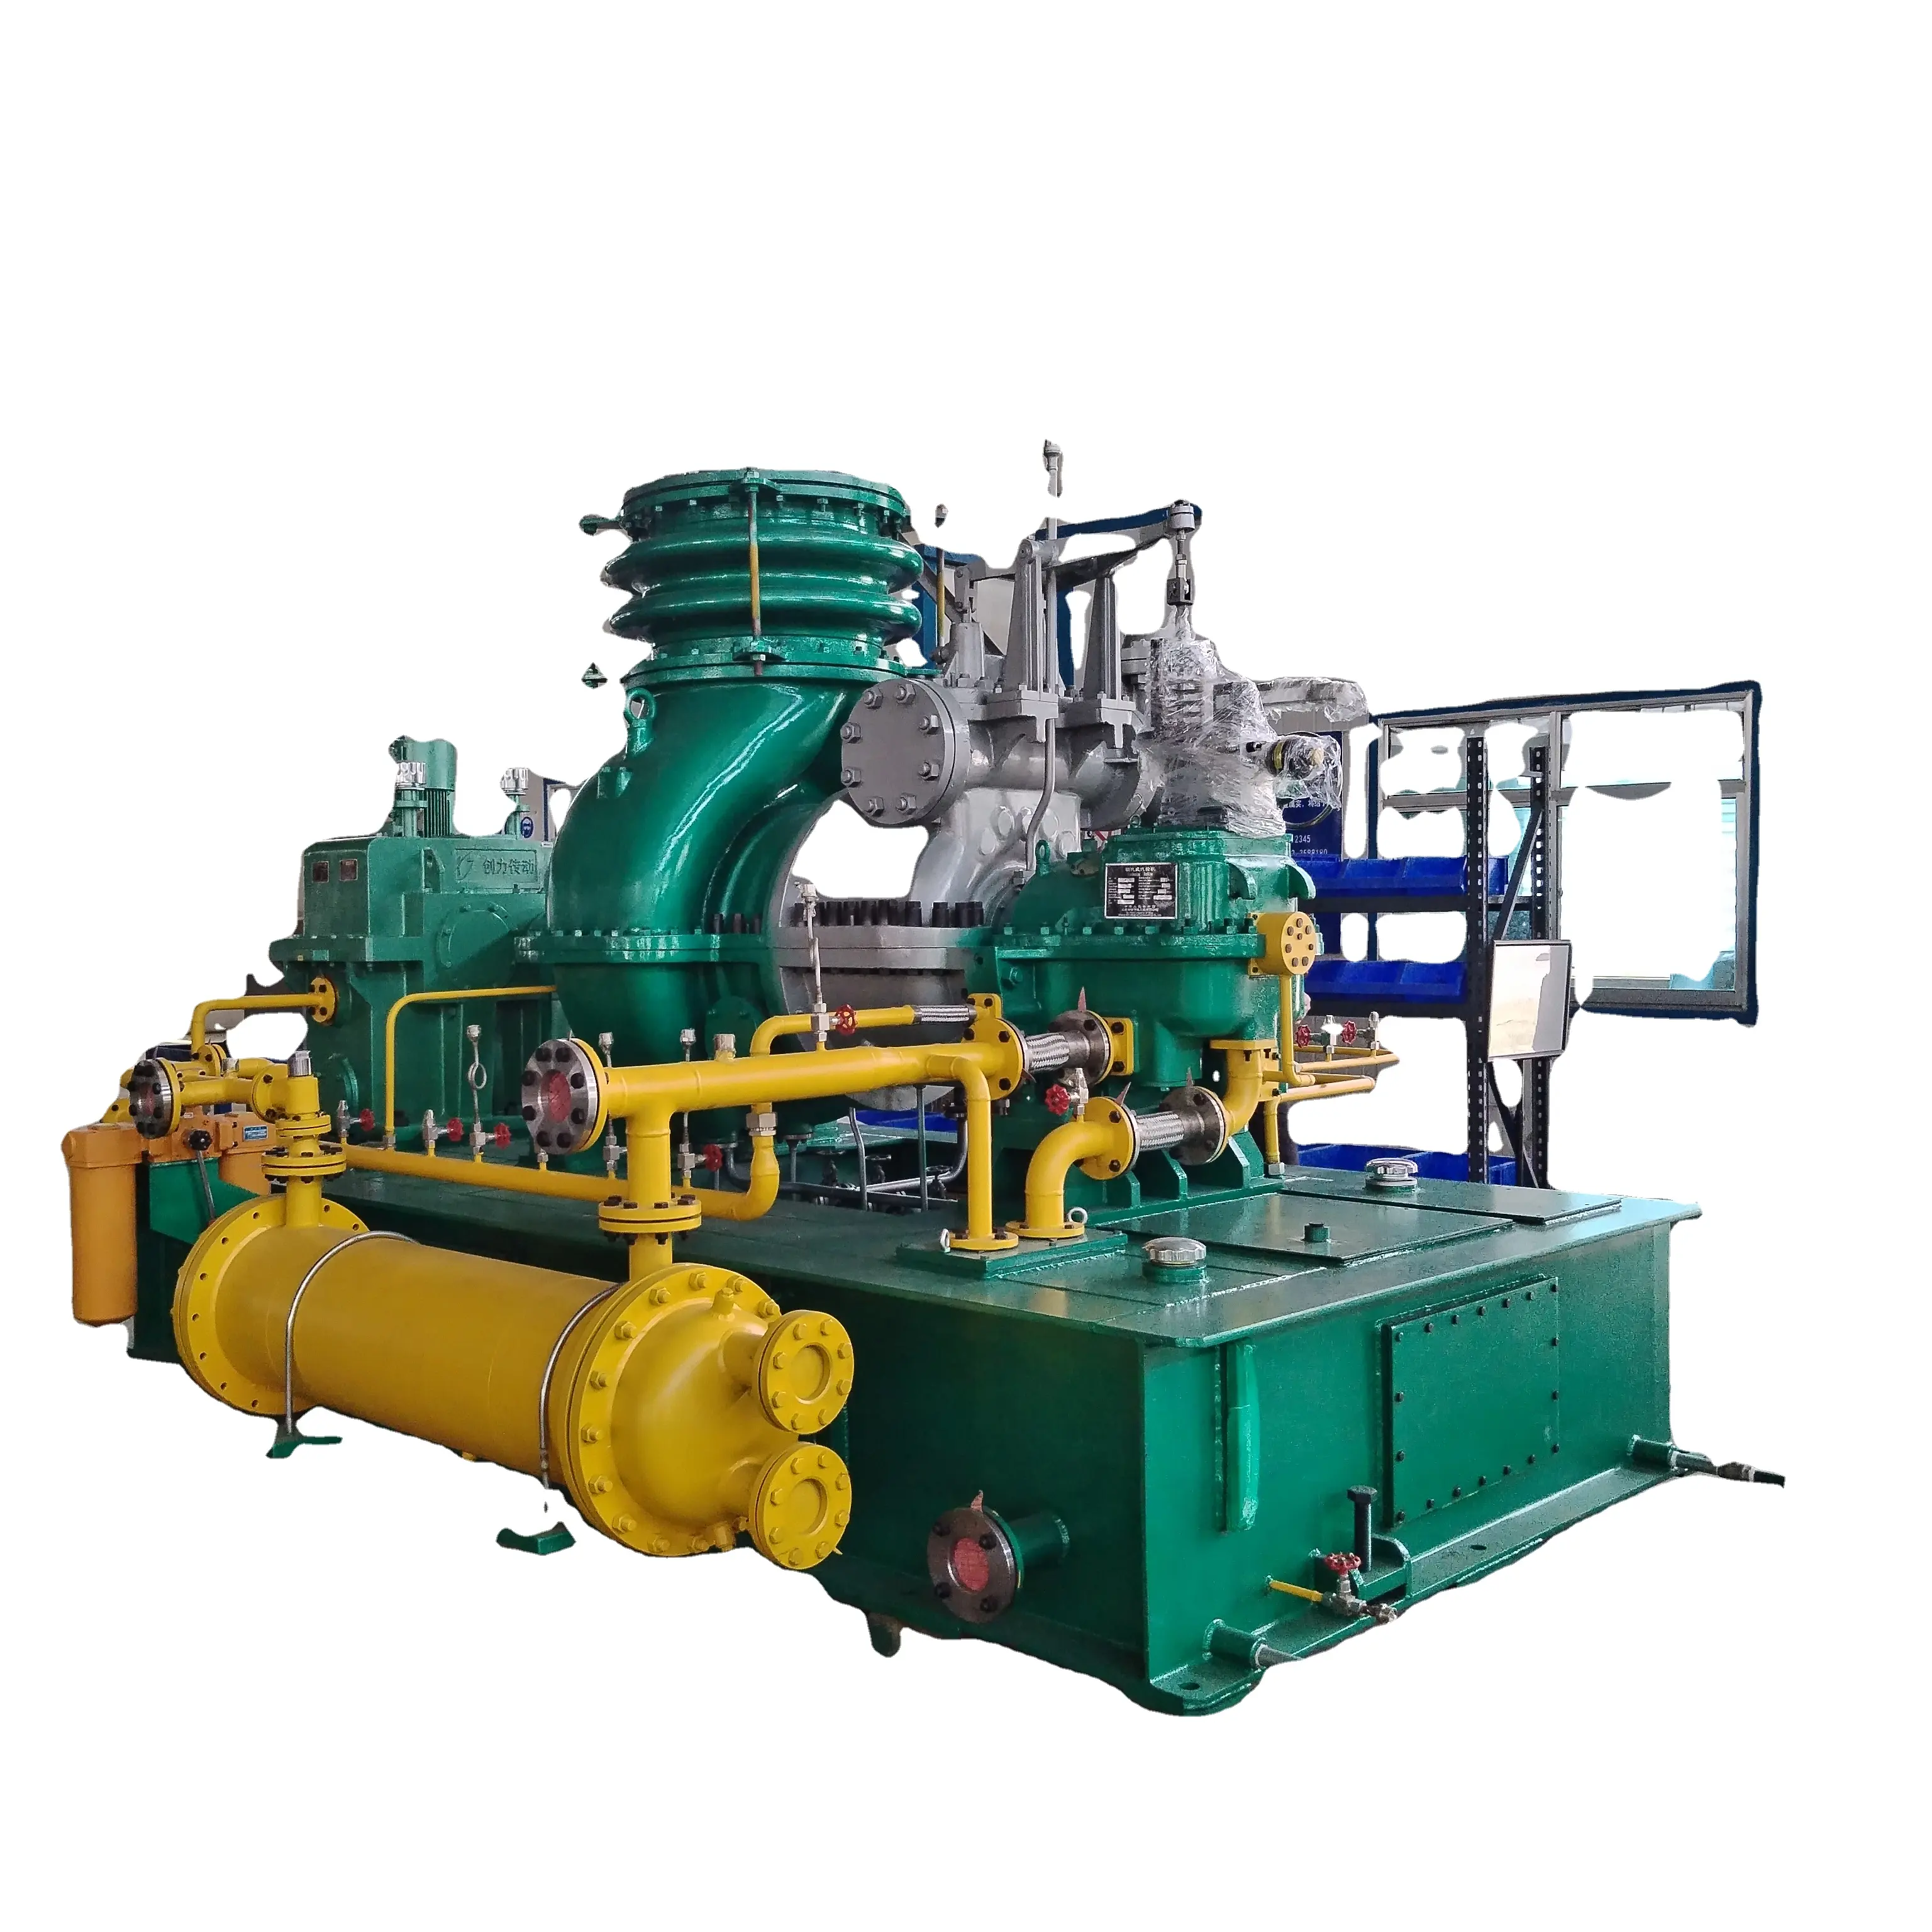 Enervy Saving Equipment Msw Gasification Power Plant System / Steam Turbine Power Generation With Best Price And High Efficiency